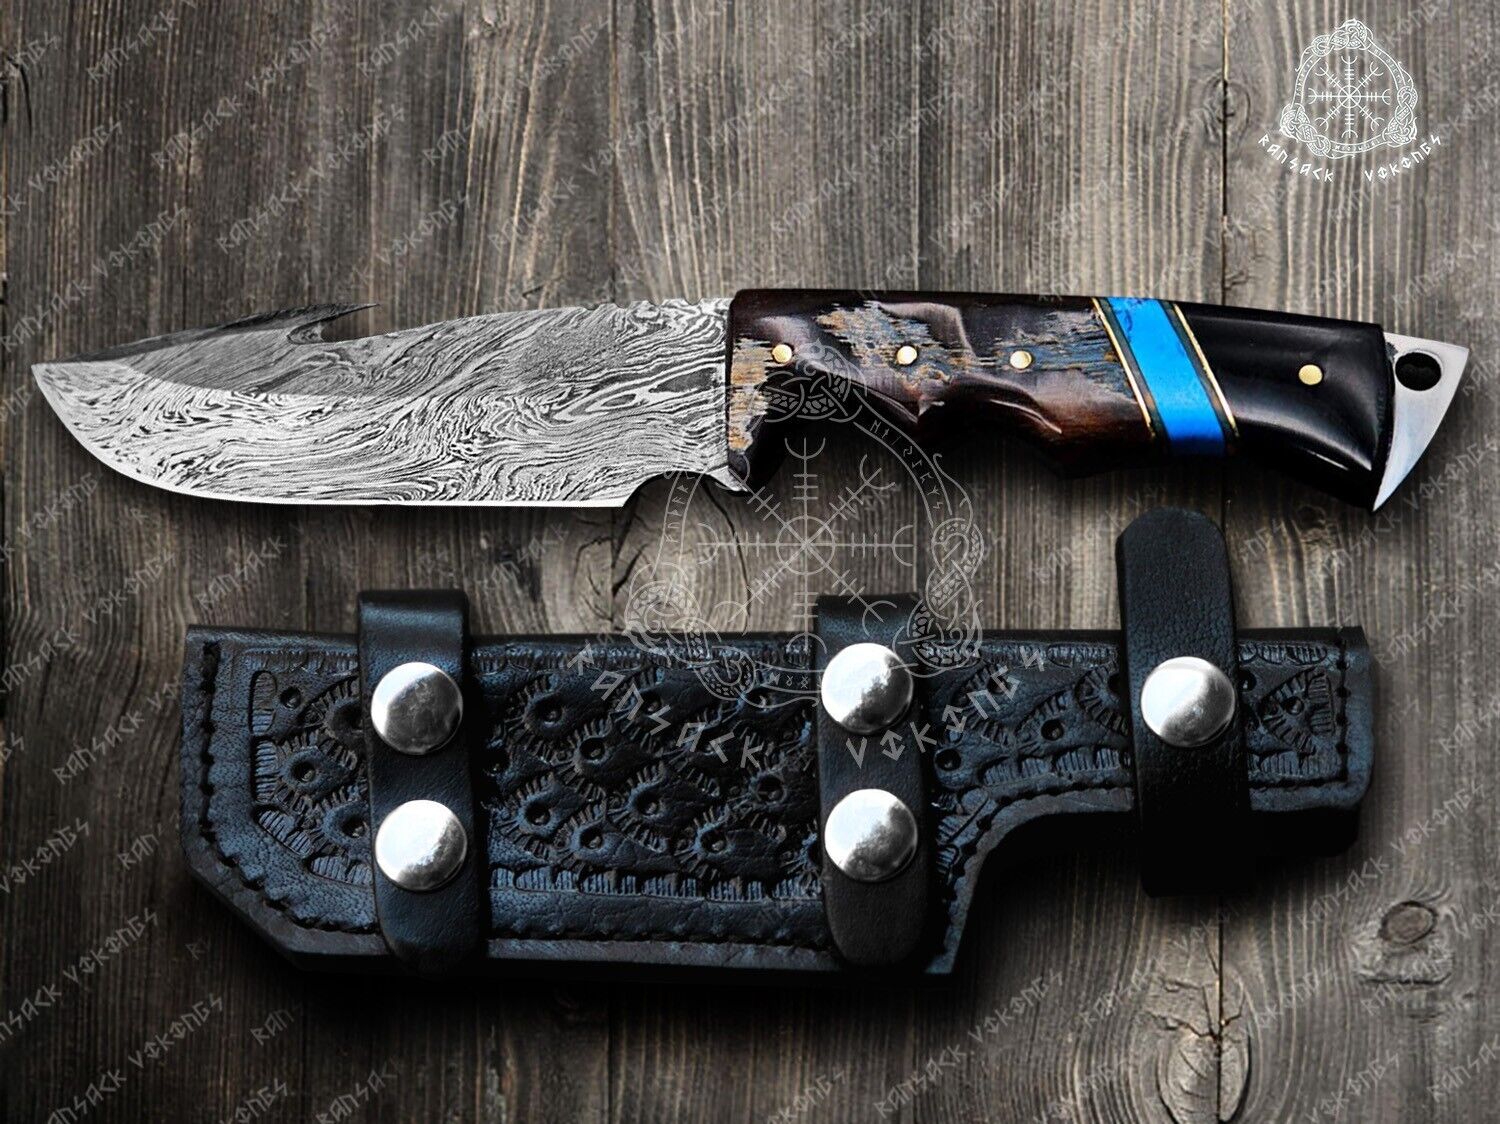 Damascus Gut Hook Hunting Knife, Camping Knife with Leather Sheath, Hand forged